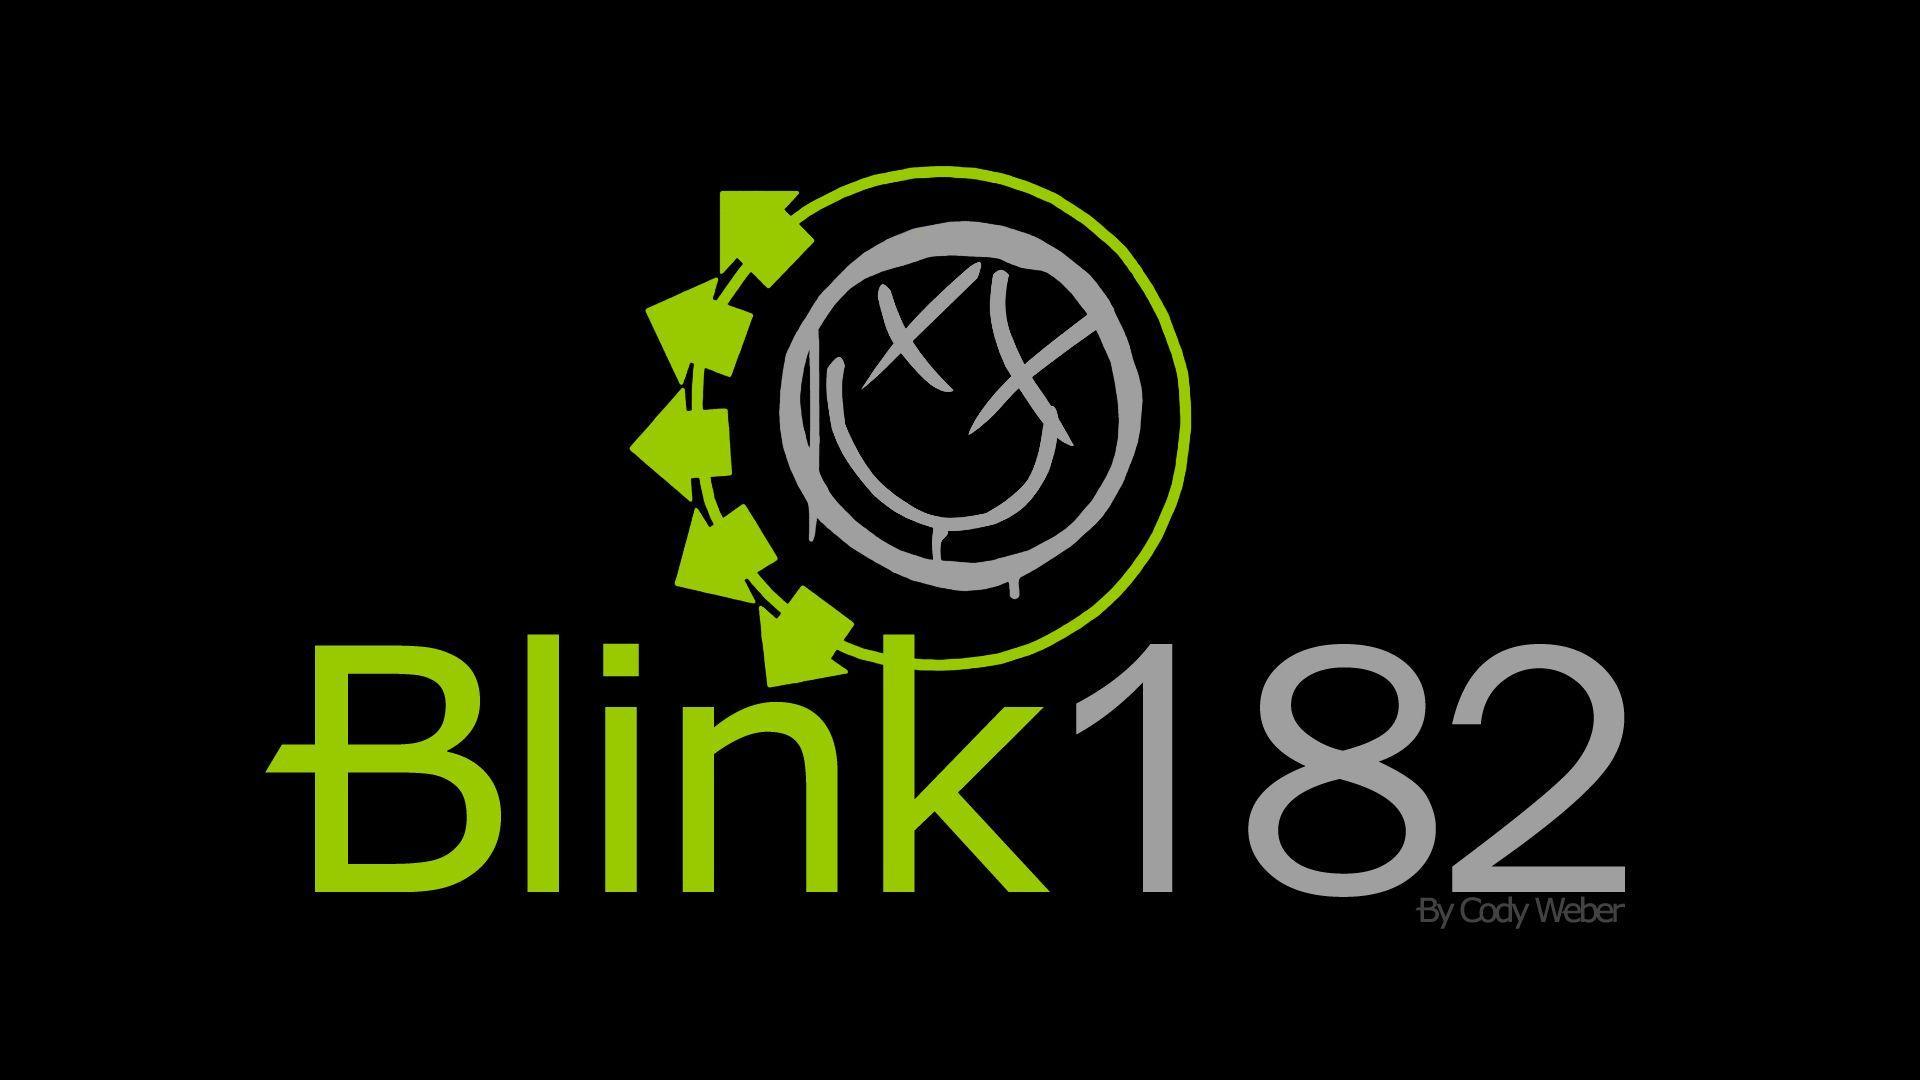 Wallpapers For > Blink 182 Ipad Wallpapers